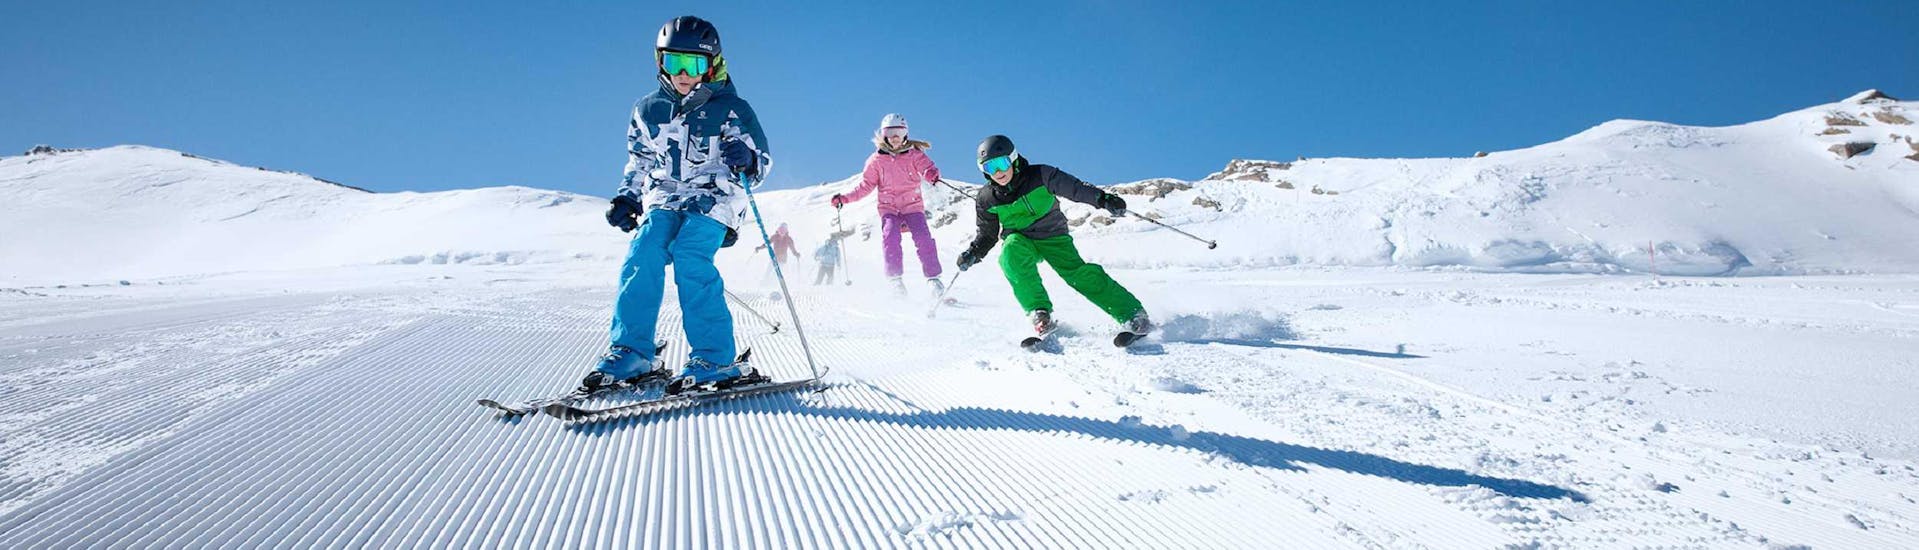 Three children racing down the slopes during their kids ski lessons All-in-One for advanced skiers with Ski Dome Viehhofen.